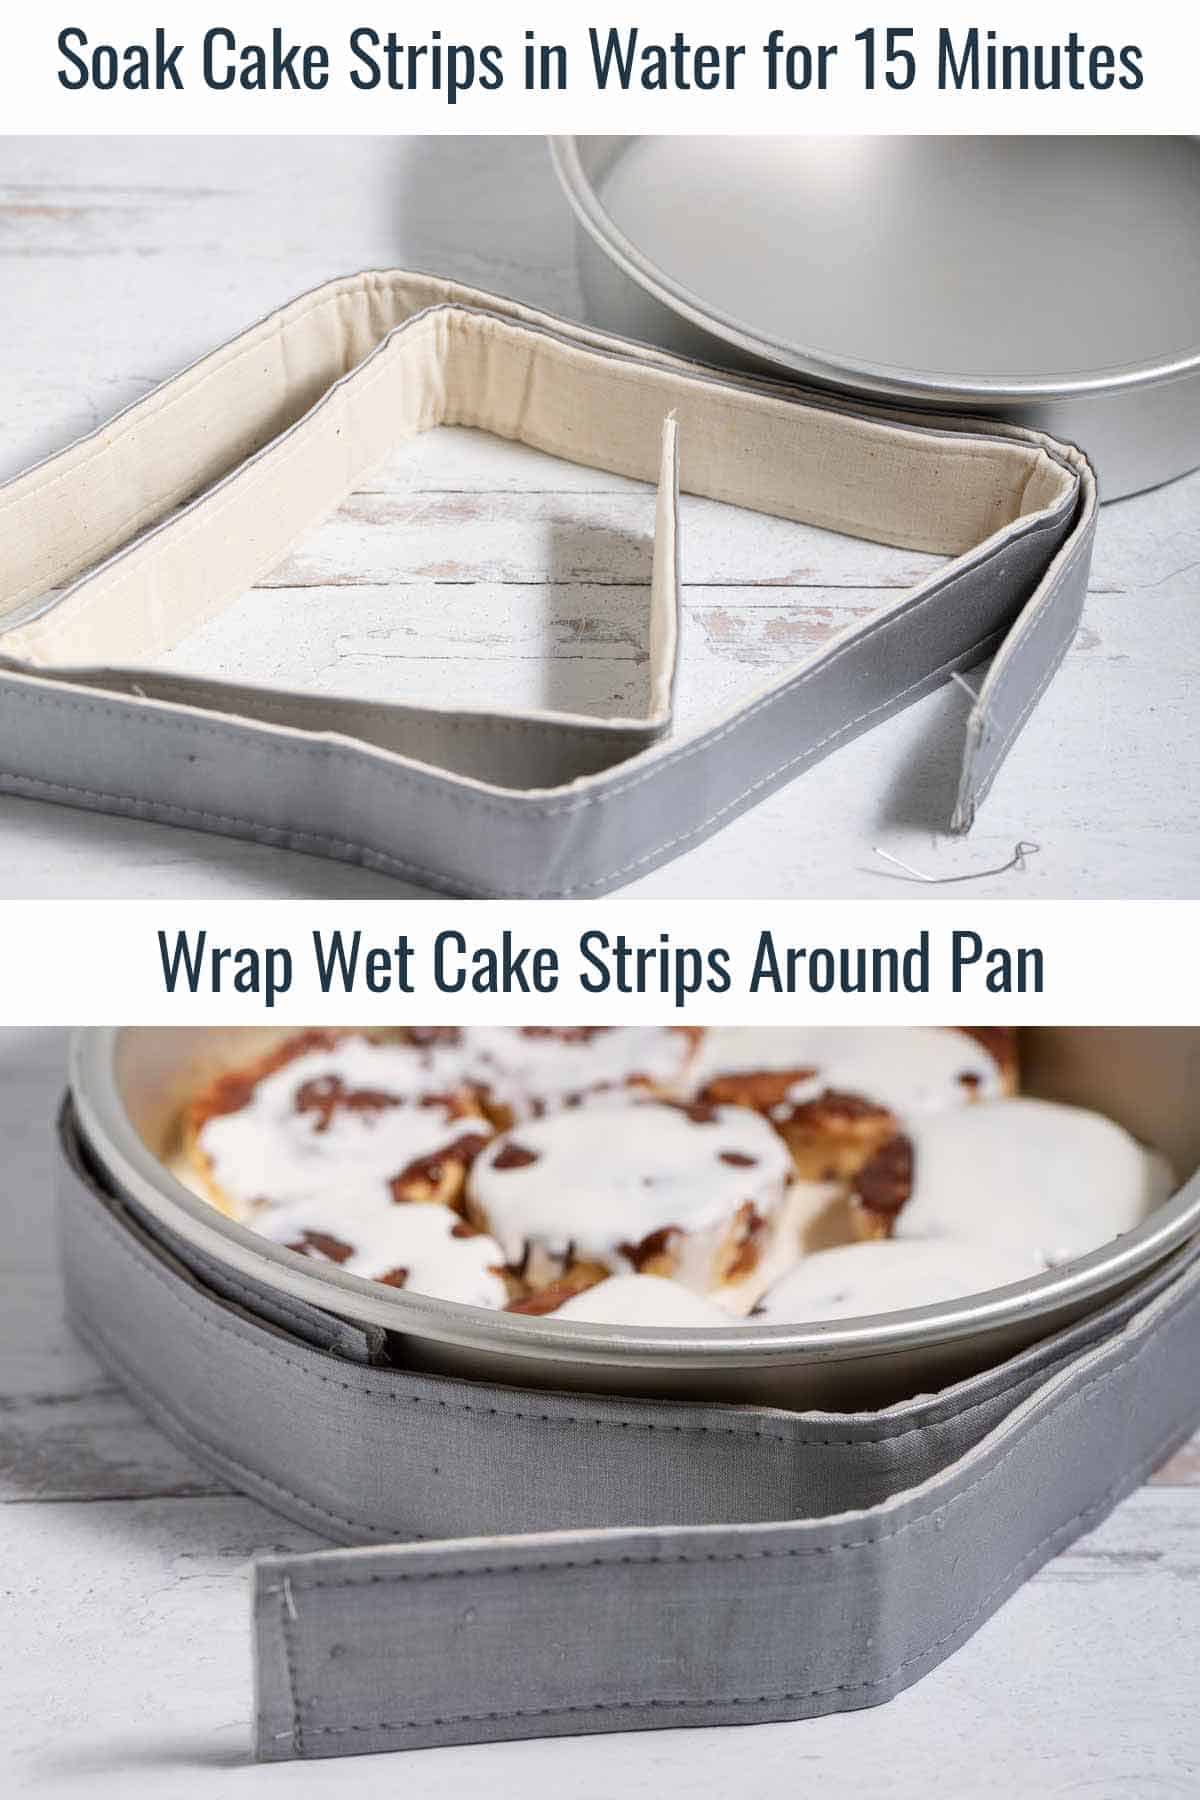 Wet cake strips around the cake pan filled with unbaked cinnamon rolls.